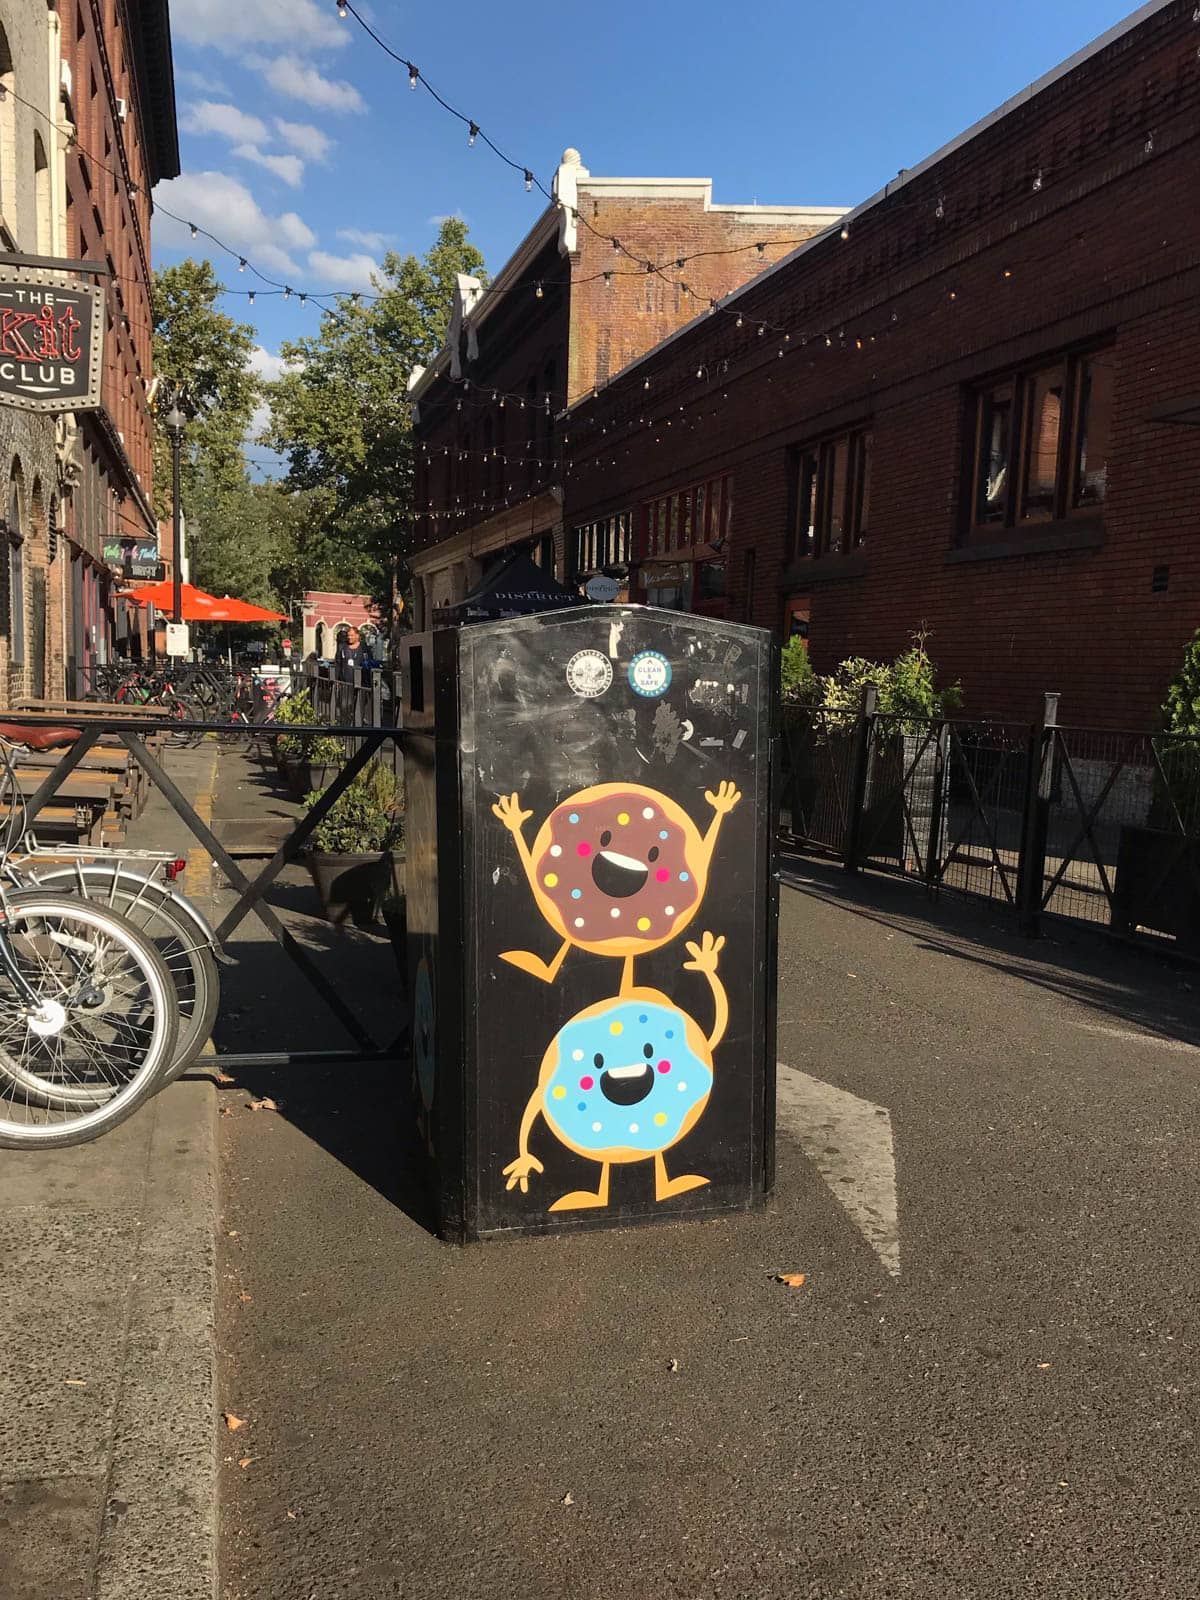 A black communal trash can in the middle of a city alleyway, with two smiling doughnuts painted on the trash can